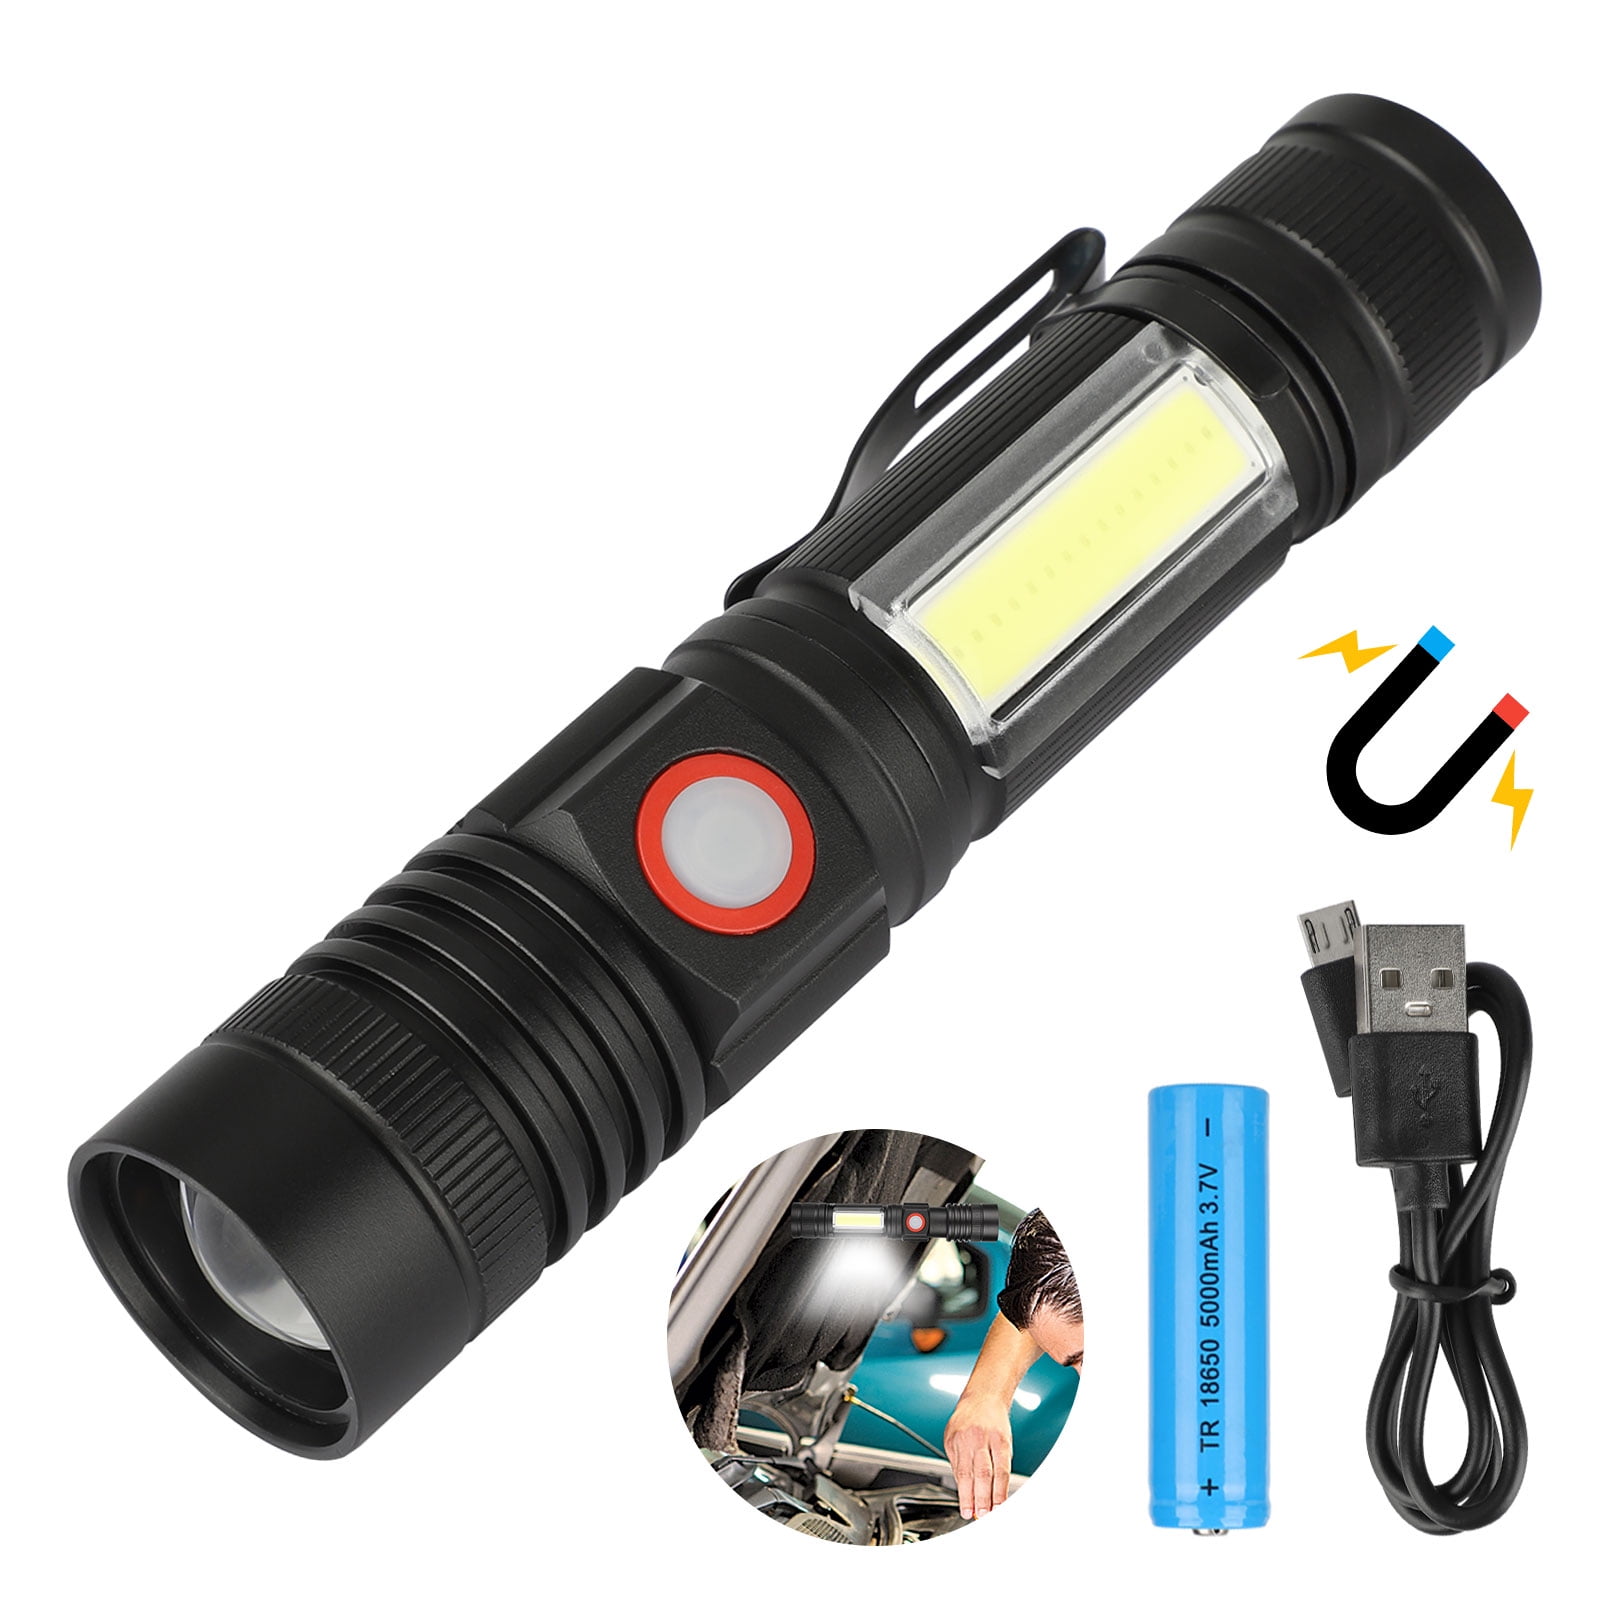 LED ULTRA BRIGHT LIGHT FLASHLIGHT WITH PIVOTAL ROTATING CLAMP MAGNETIC BASE 4" H 